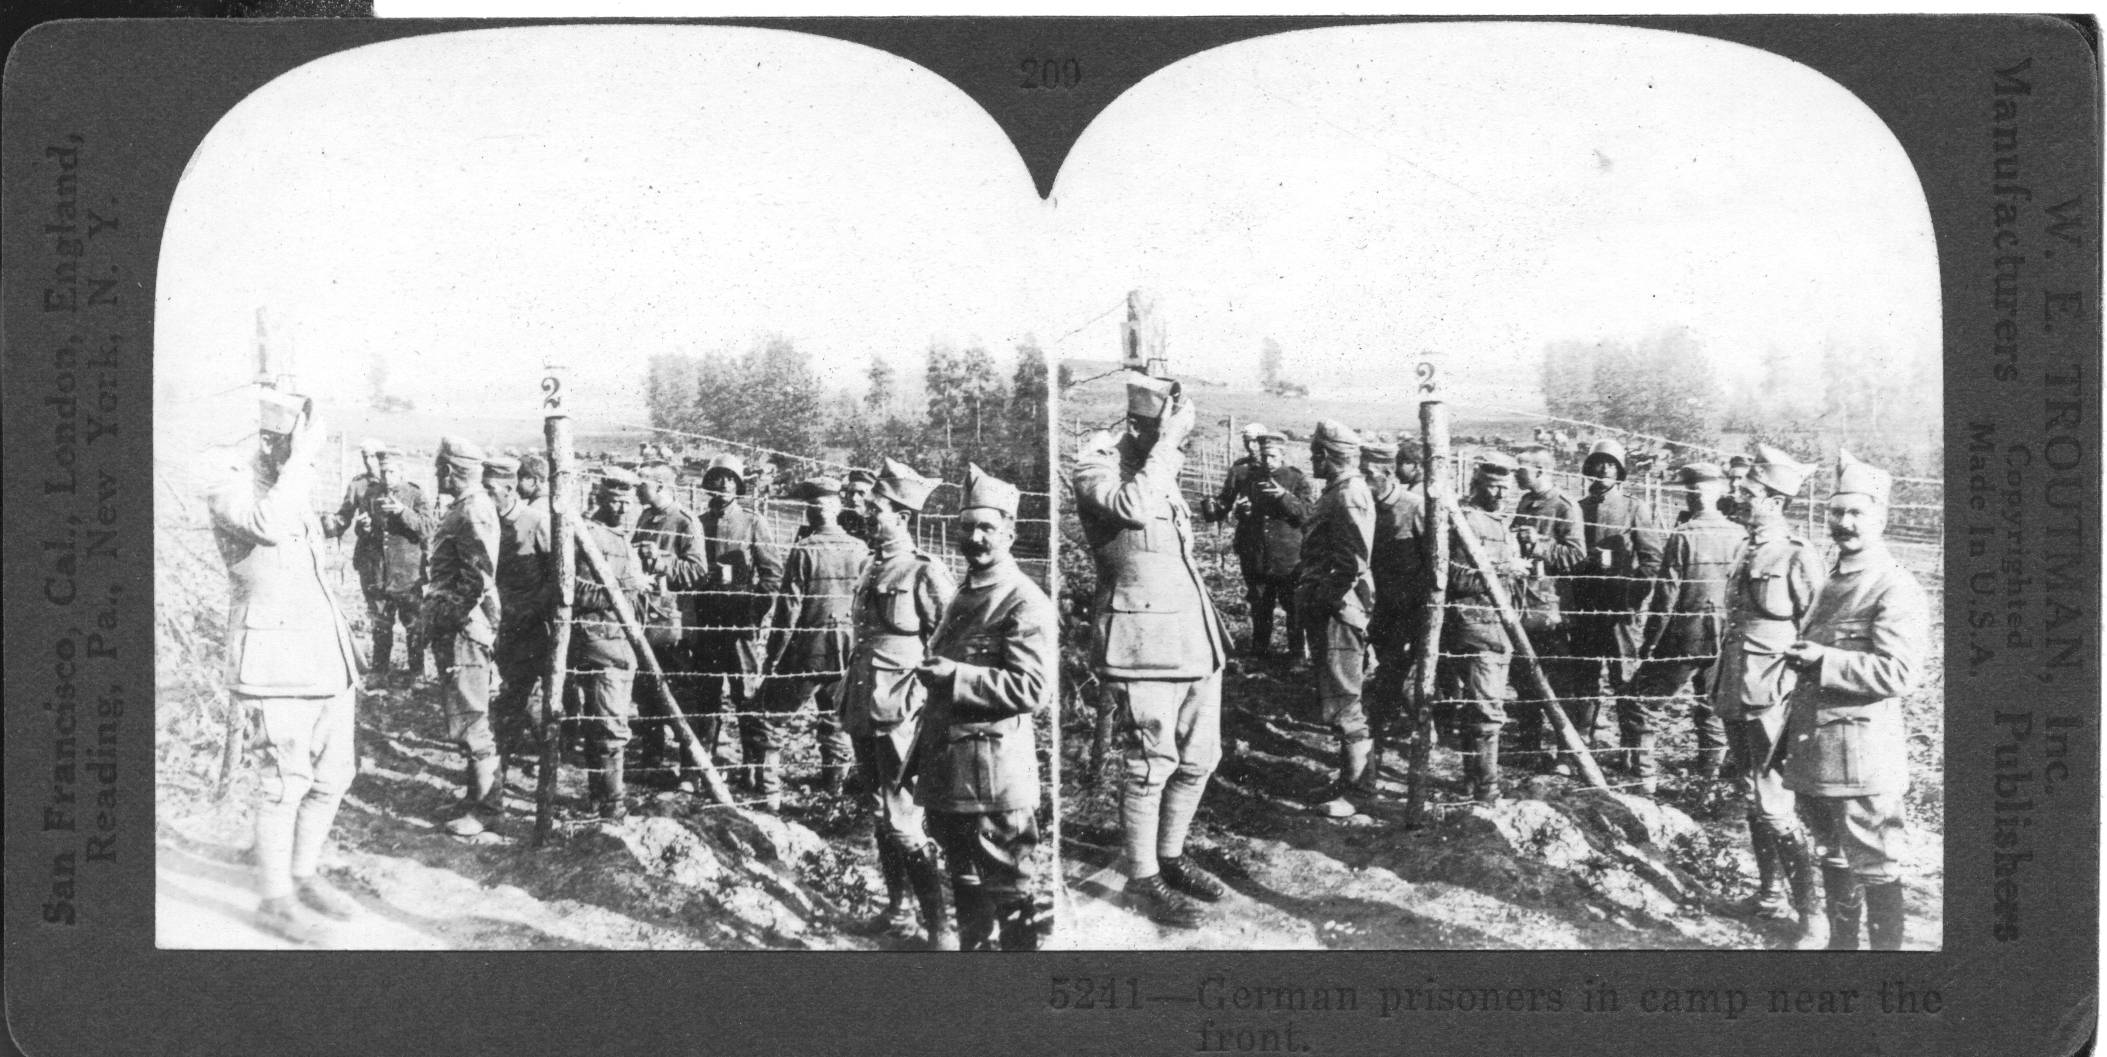 German prisoners in camp near the front